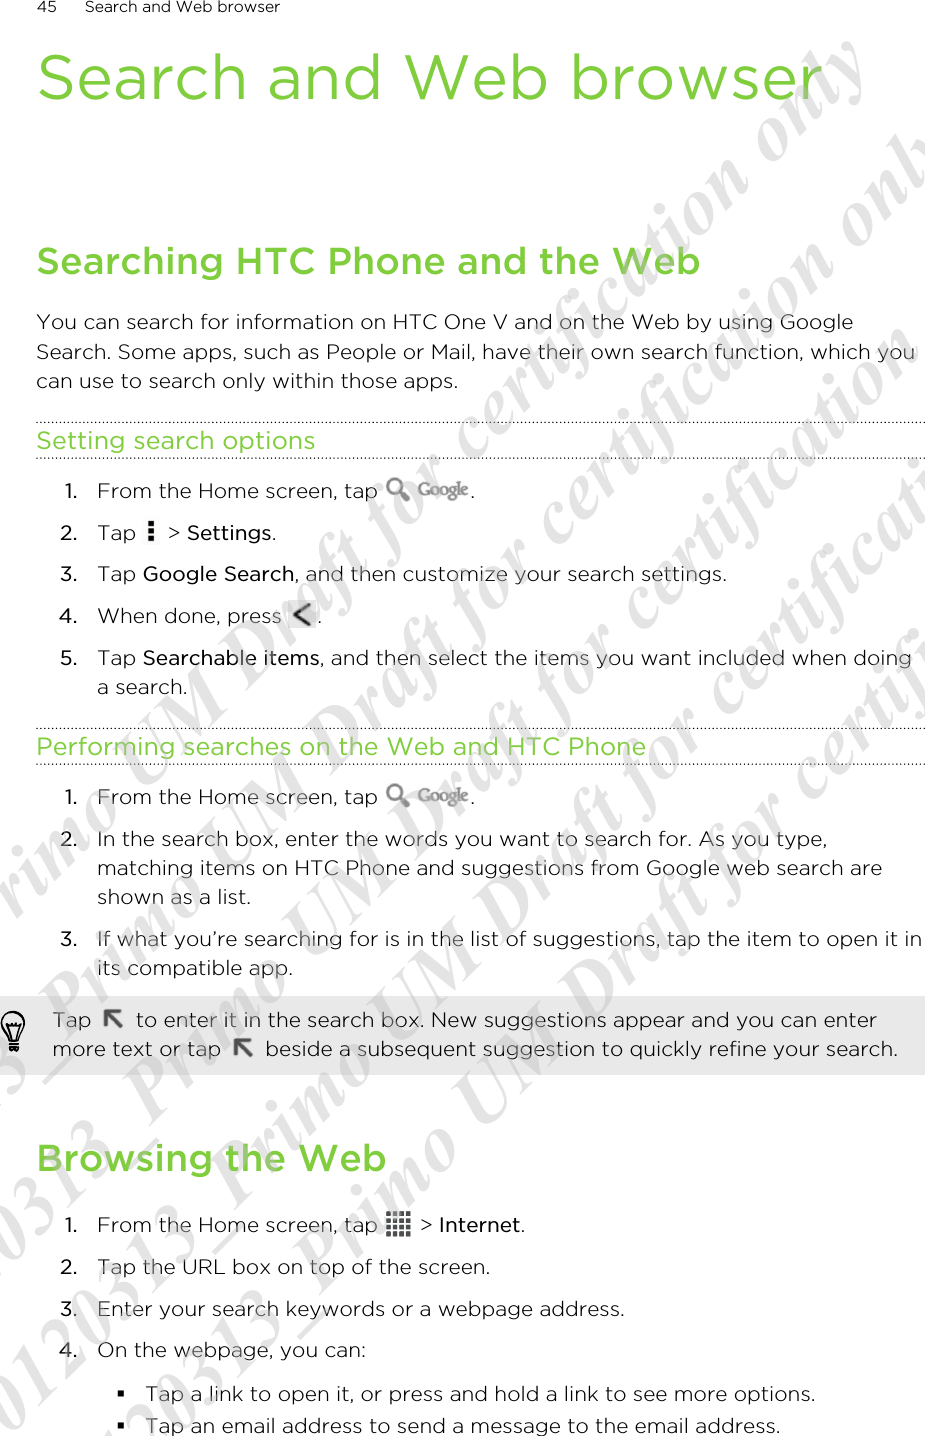 Search and Web browserSearching HTC Phone and the WebYou can search for information on HTC One V and on the Web by using GoogleSearch. Some apps, such as People or Mail, have their own search function, which youcan use to search only within those apps.Setting search options1. From the Home screen, tap  .2. Tap   &gt; Settings.3. Tap Google Search, and then customize your search settings.4. When done, press  .5. Tap Searchable items, and then select the items you want included when doinga search.Performing searches on the Web and HTC Phone1. From the Home screen, tap  .2. In the search box, enter the words you want to search for. As you type,matching items on HTC Phone and suggestions from Google web search areshown as a list.3. If what you’re searching for is in the list of suggestions, tap the item to open it inits compatible app. Tap   to enter it in the search box. New suggestions appear and you can entermore text or tap   beside a subsequent suggestion to quickly refine your search.Browsing the Web1. From the Home screen, tap   &gt; Internet.2. Tap the URL box on top of the screen.3. Enter your search keywords or a webpage address.4. On the webpage, you can:§Tap a link to open it, or press and hold a link to see more options.§Tap an email address to send a message to the email address.45 Search and Web browser20120313_Primo UM Draft for certification only 20120313_Primo UM Draft for certification only 20120313_Primo UM Draft for certification only 20120313_Primo UM Draft for certification only 20120313_Primo UM Draft for certification only